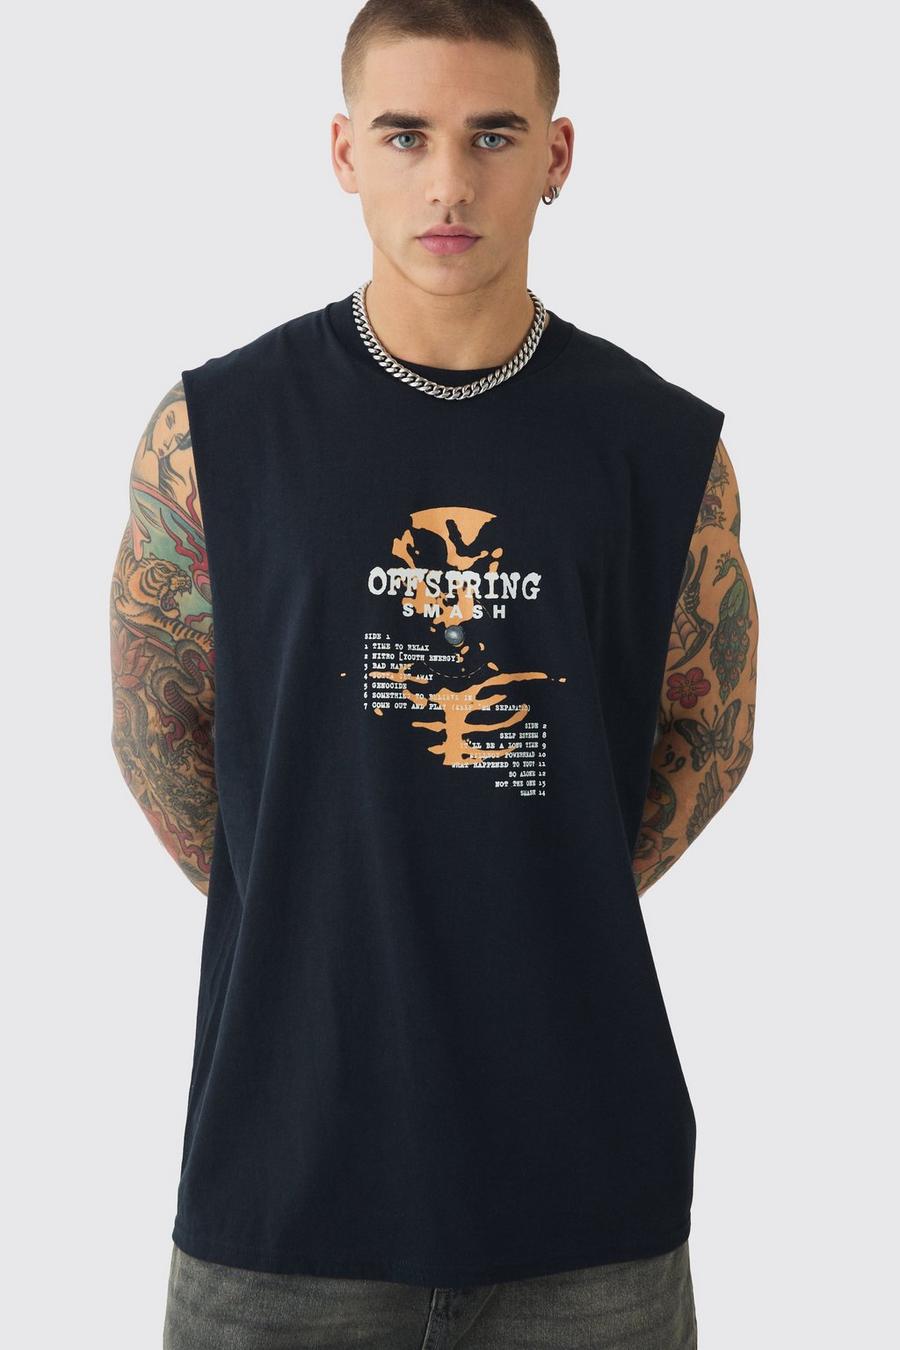 Black Oversized Large Scale Offspring Band License Tank